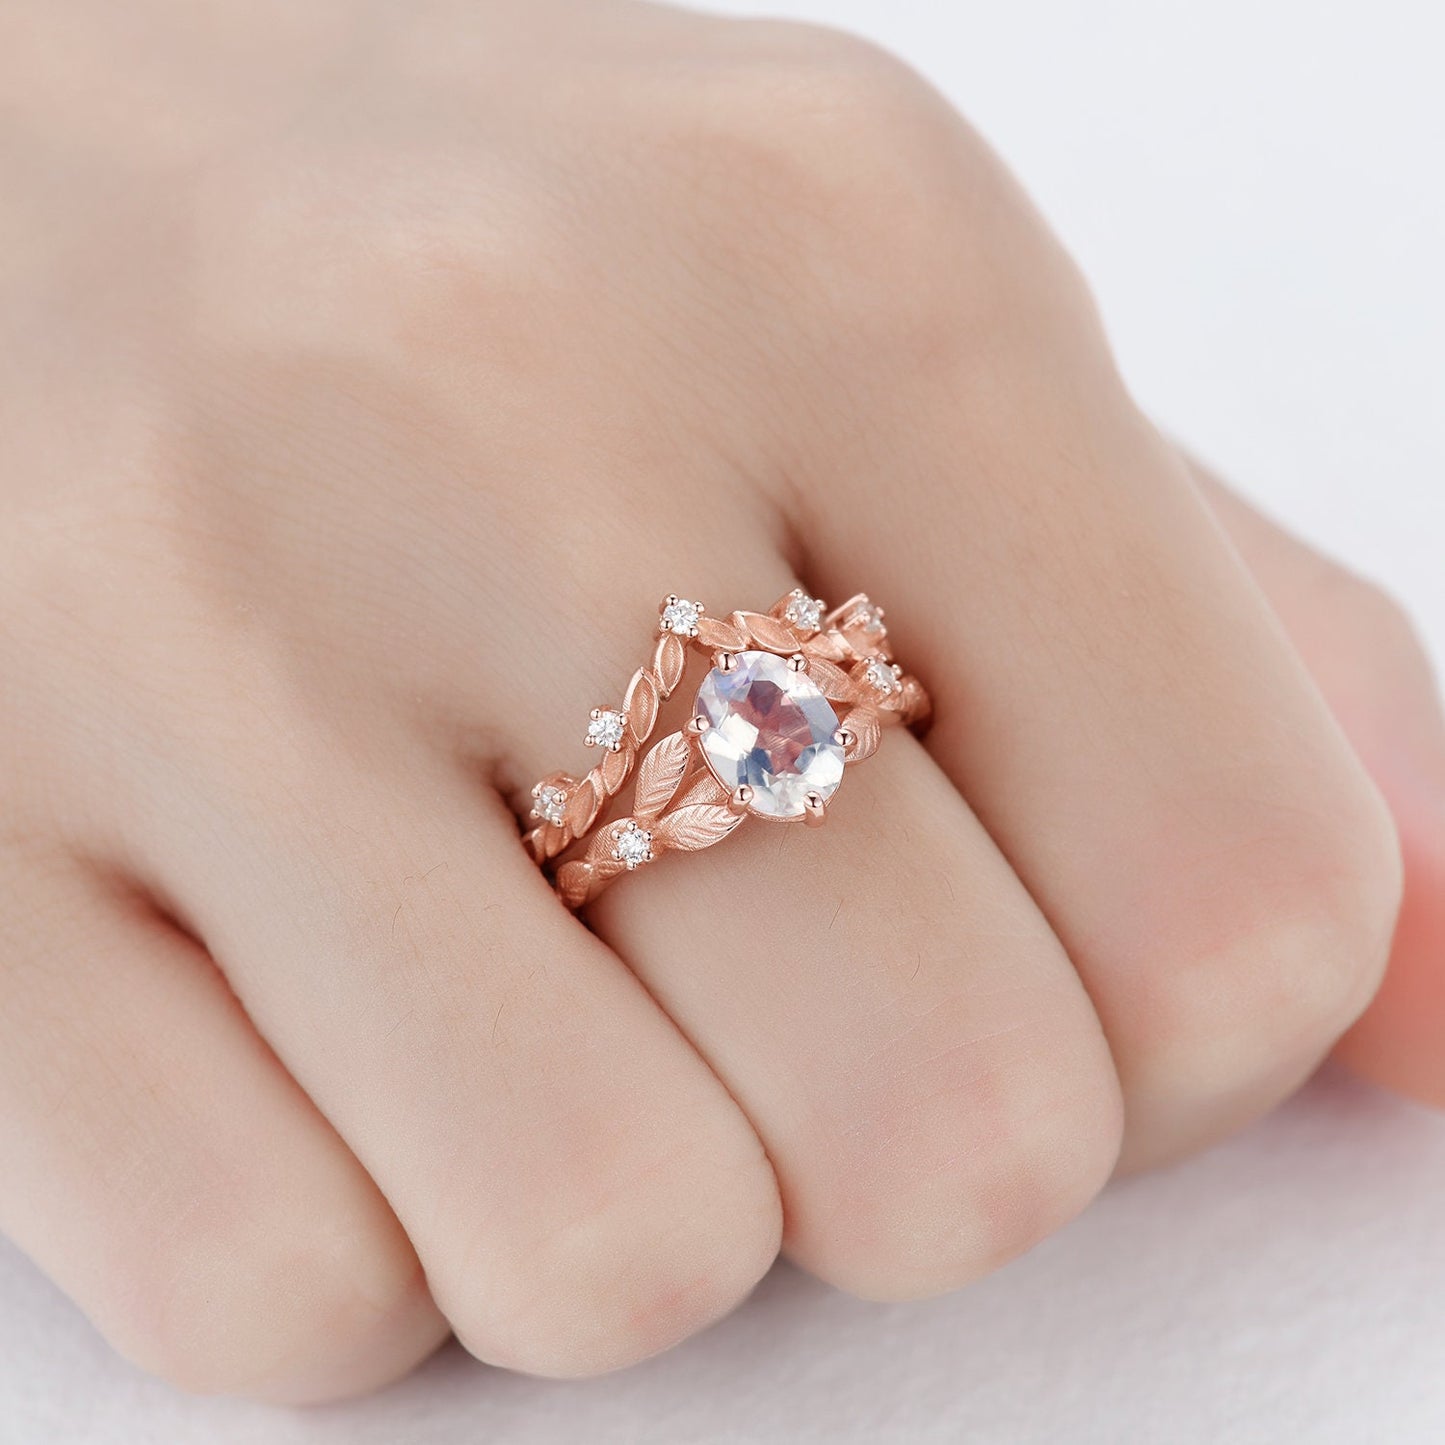 Rainbow Moonstone Engagement Ring Set Rose Gold Bridal Antique Floral Moonstone Diamond Ring Art Deco Curved Stacking Band  Birthday Gift